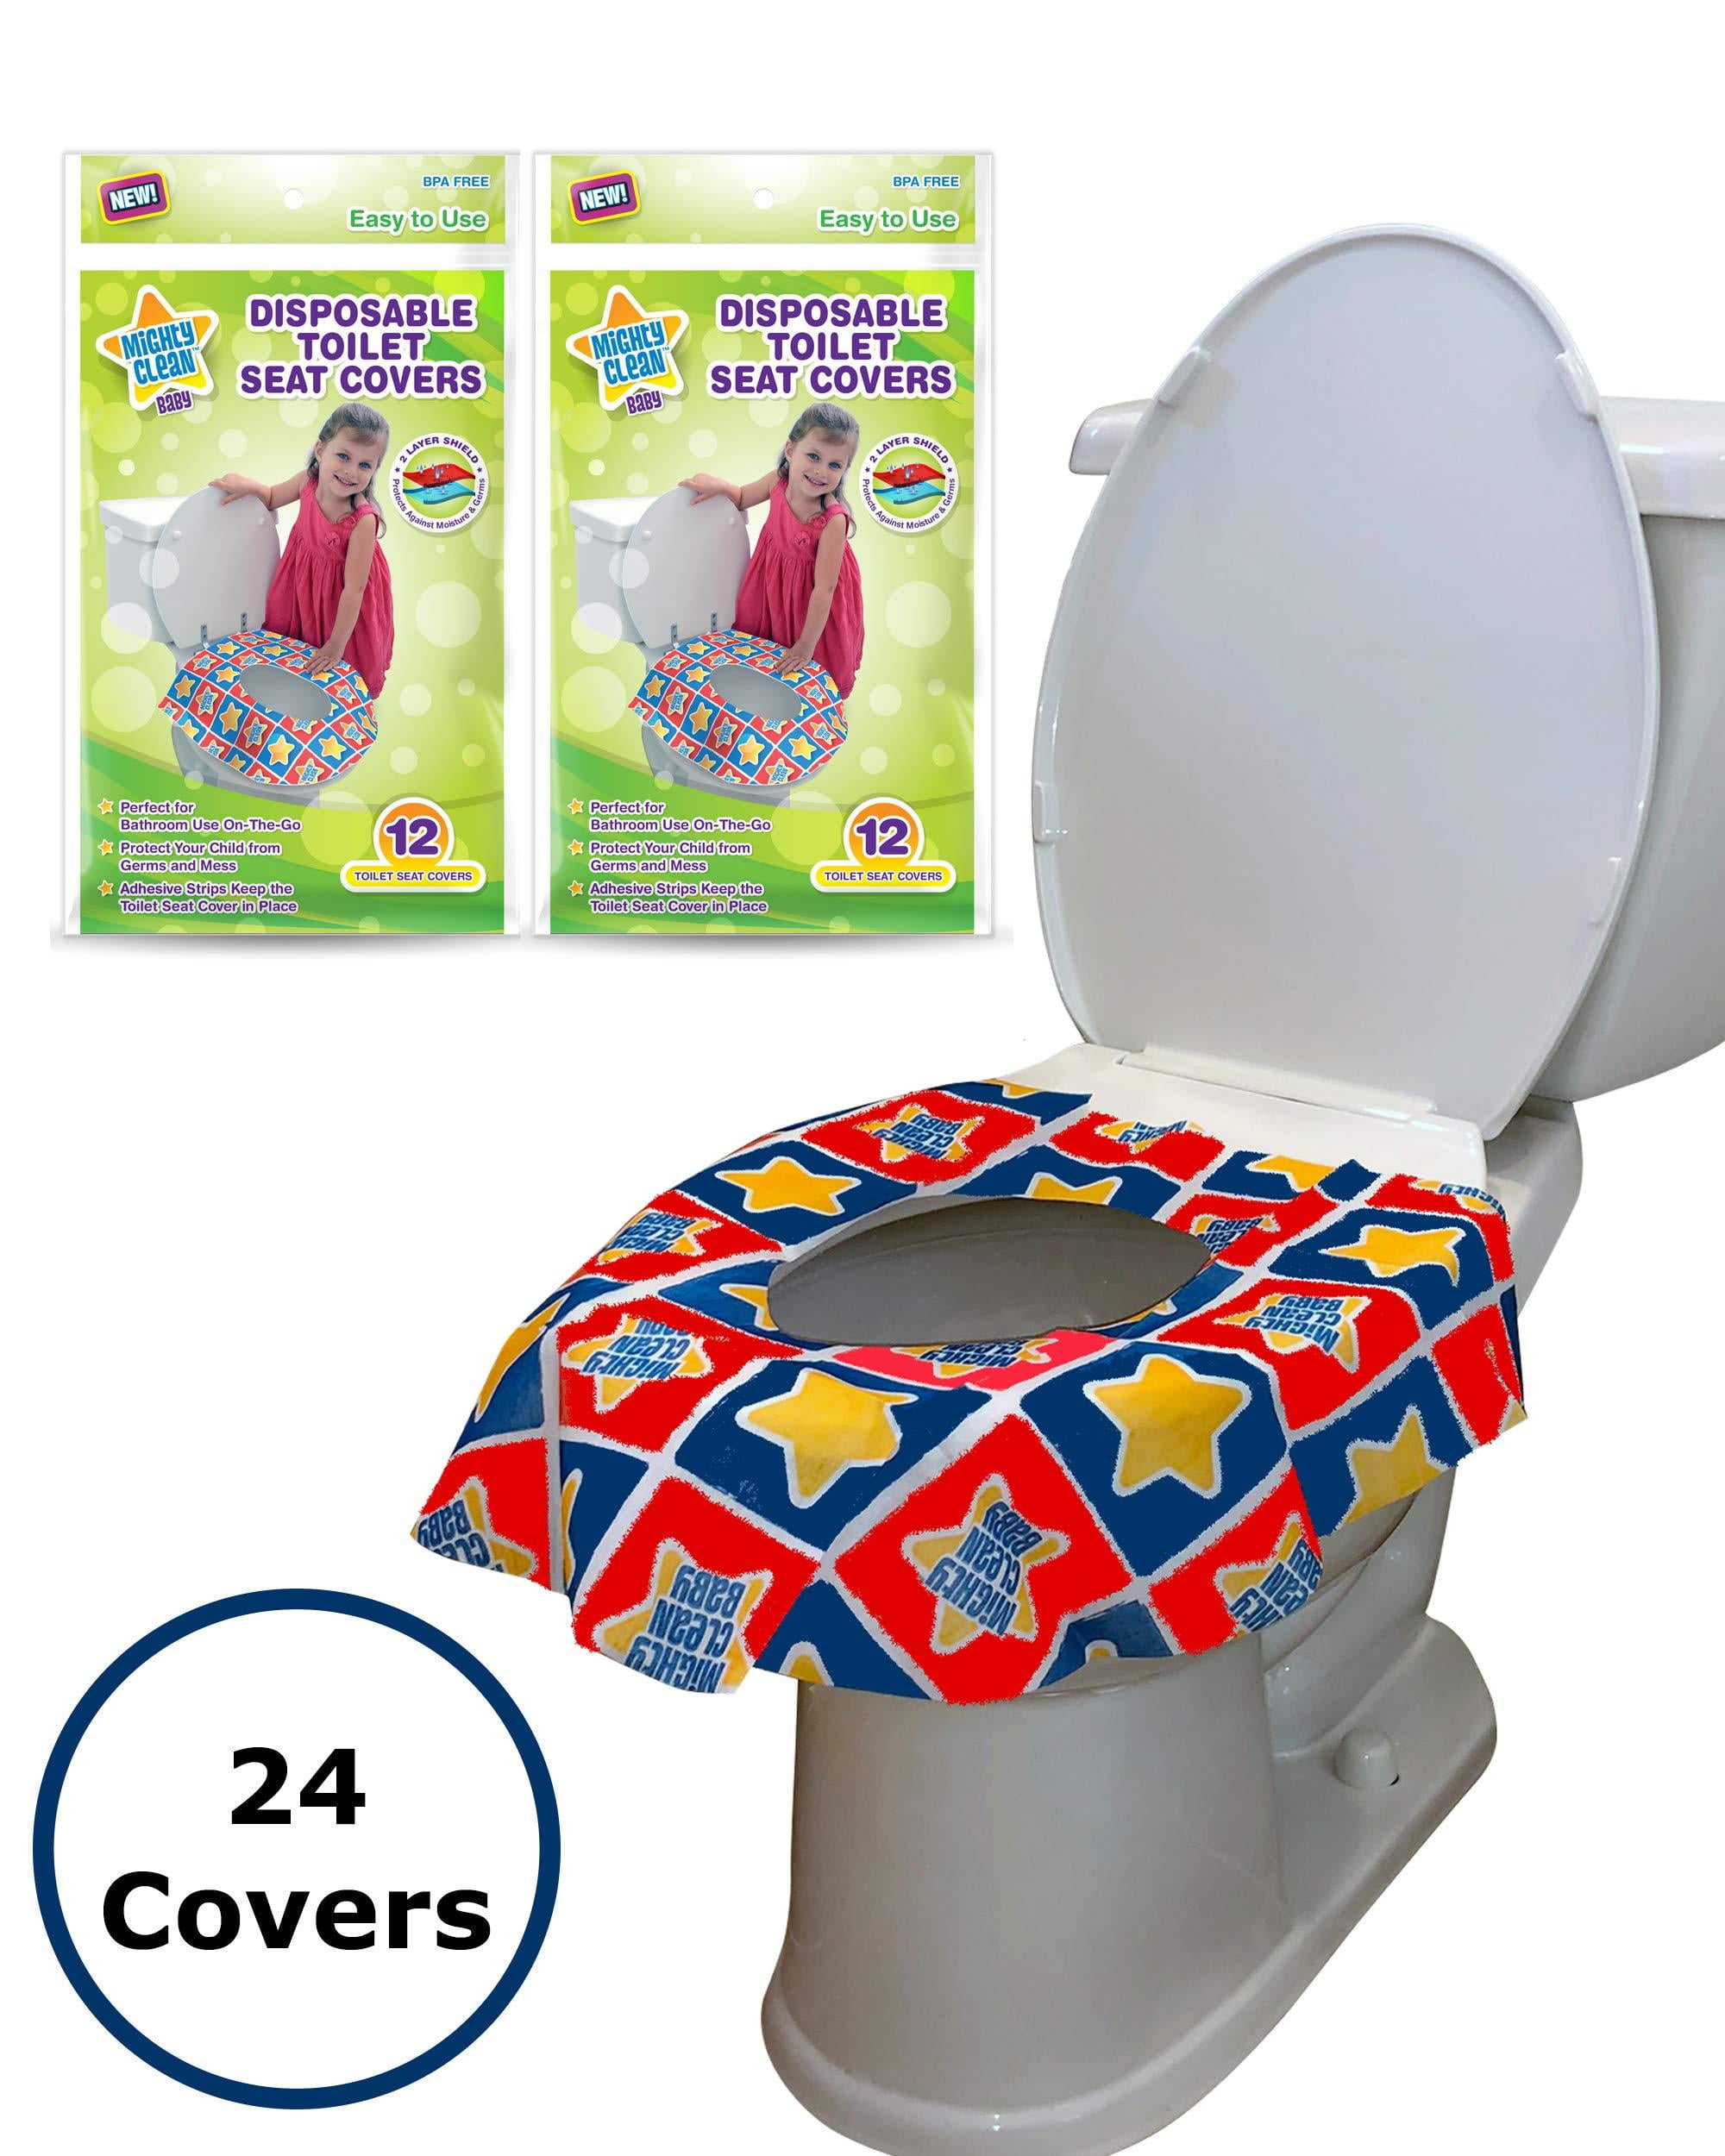 Disposable potty